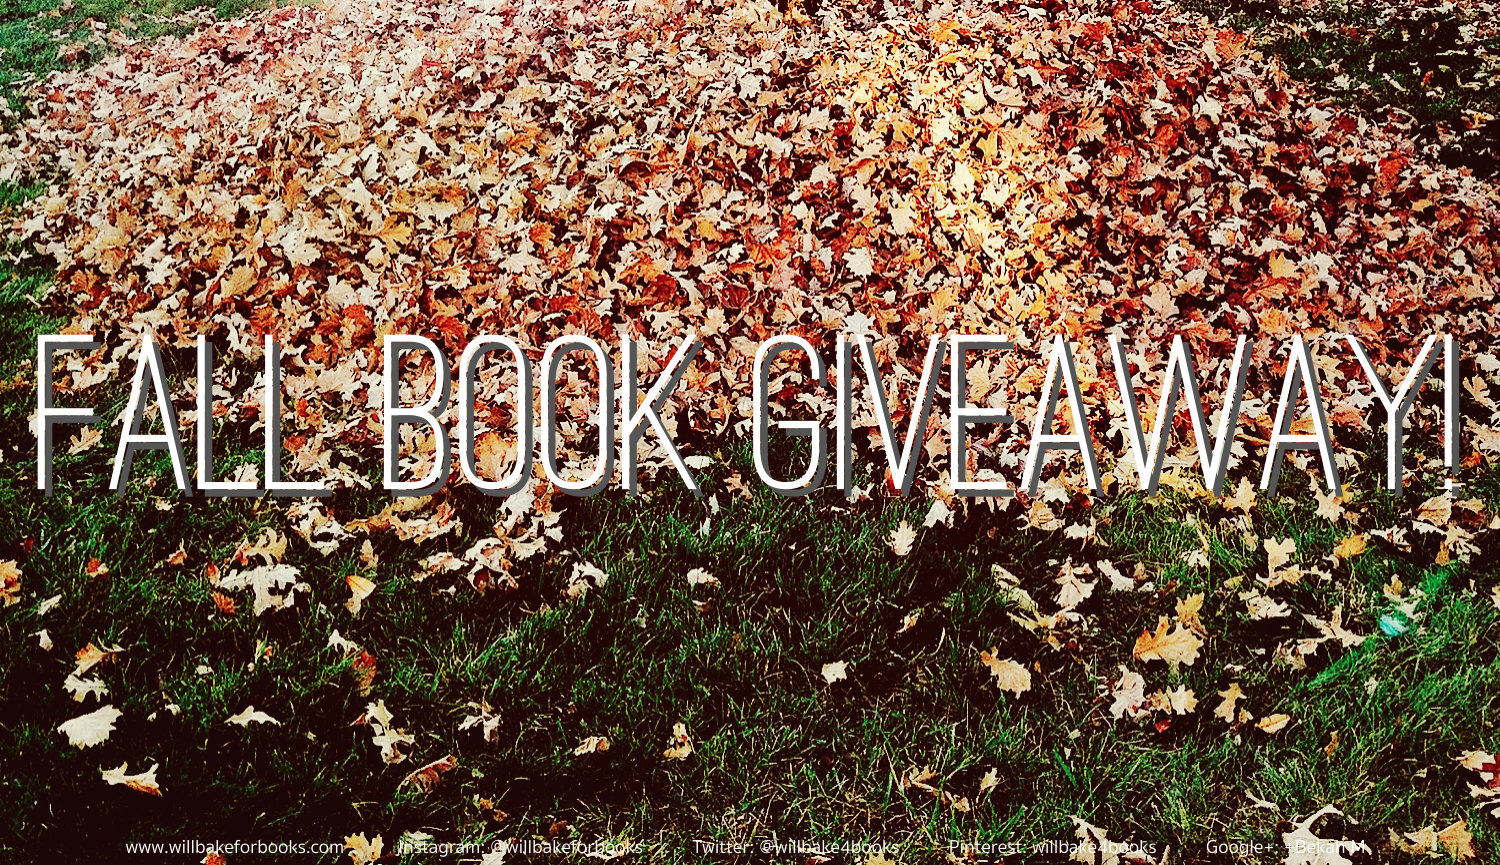 Fall Book Giveaway: signed copy of 5 to 1 by Holly Bodger | www.willbakeforbooks.com